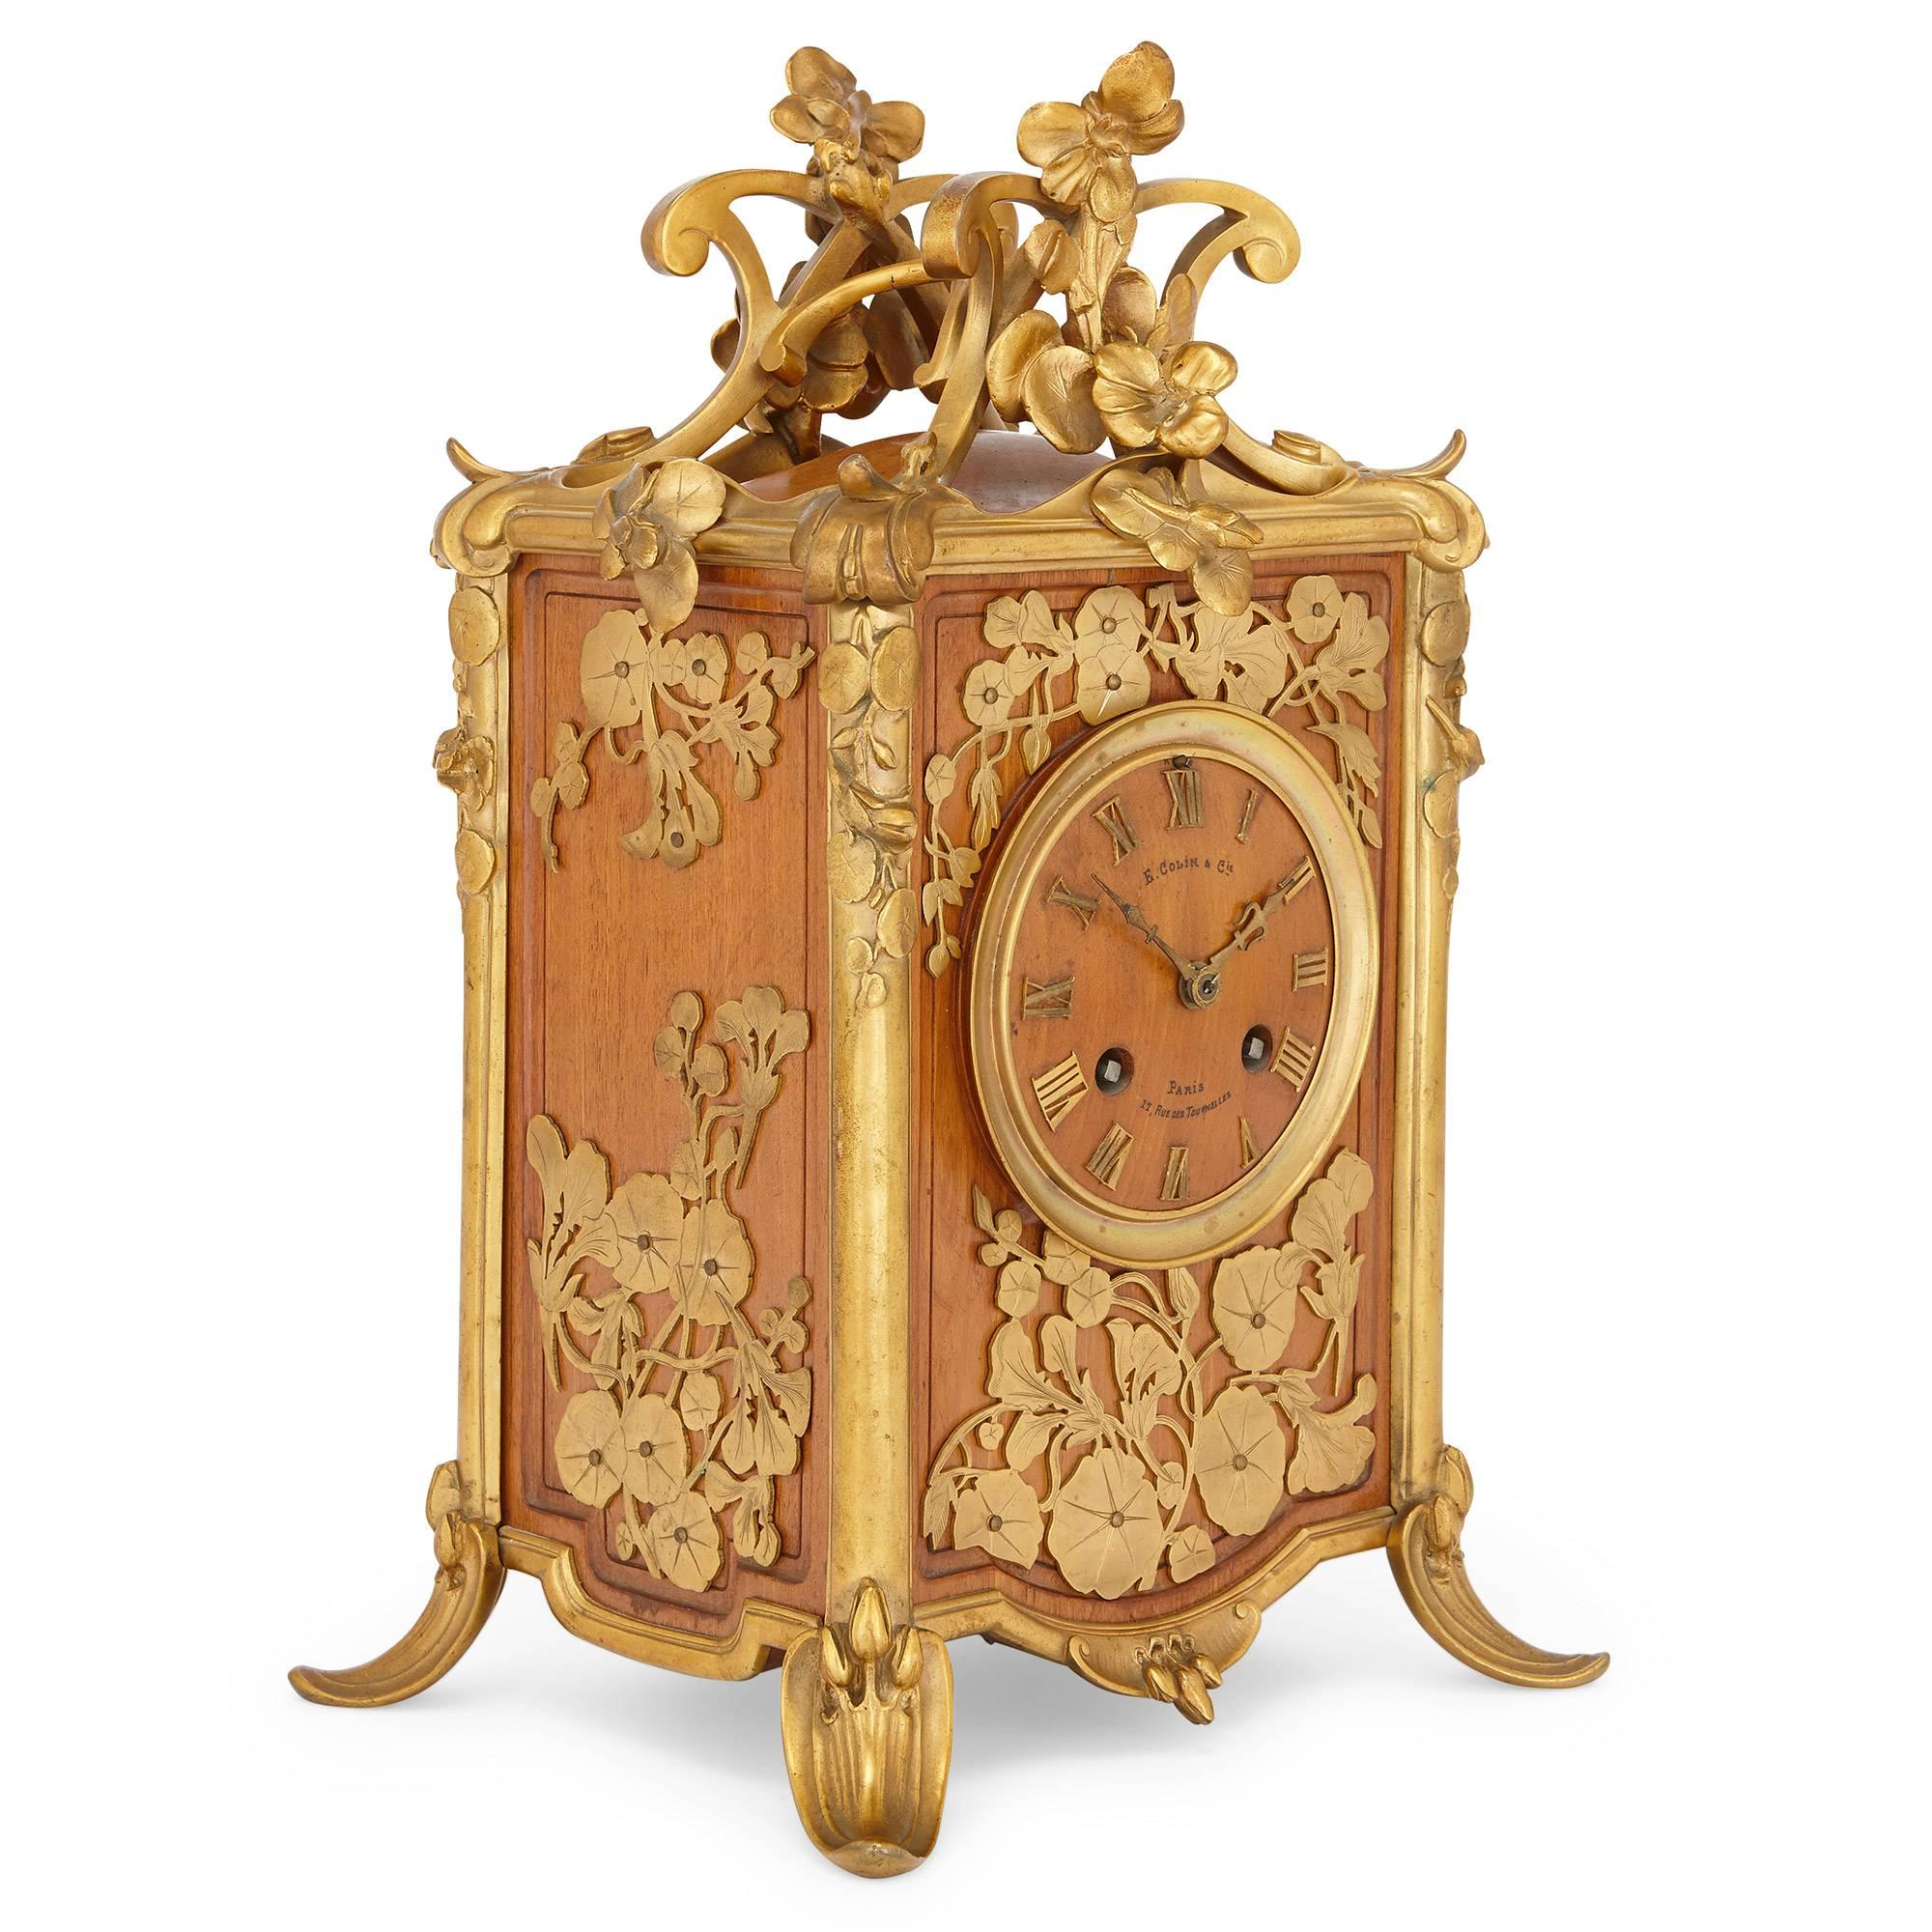 This elegant antique mantel clock is of the Art Nouveau period, and is set within a fine rectangular wooden case embellished with gilt bronze (ormolu) borders and floral decorations.

The clock was made by renowned Parisian maker E. Colin & Cie,